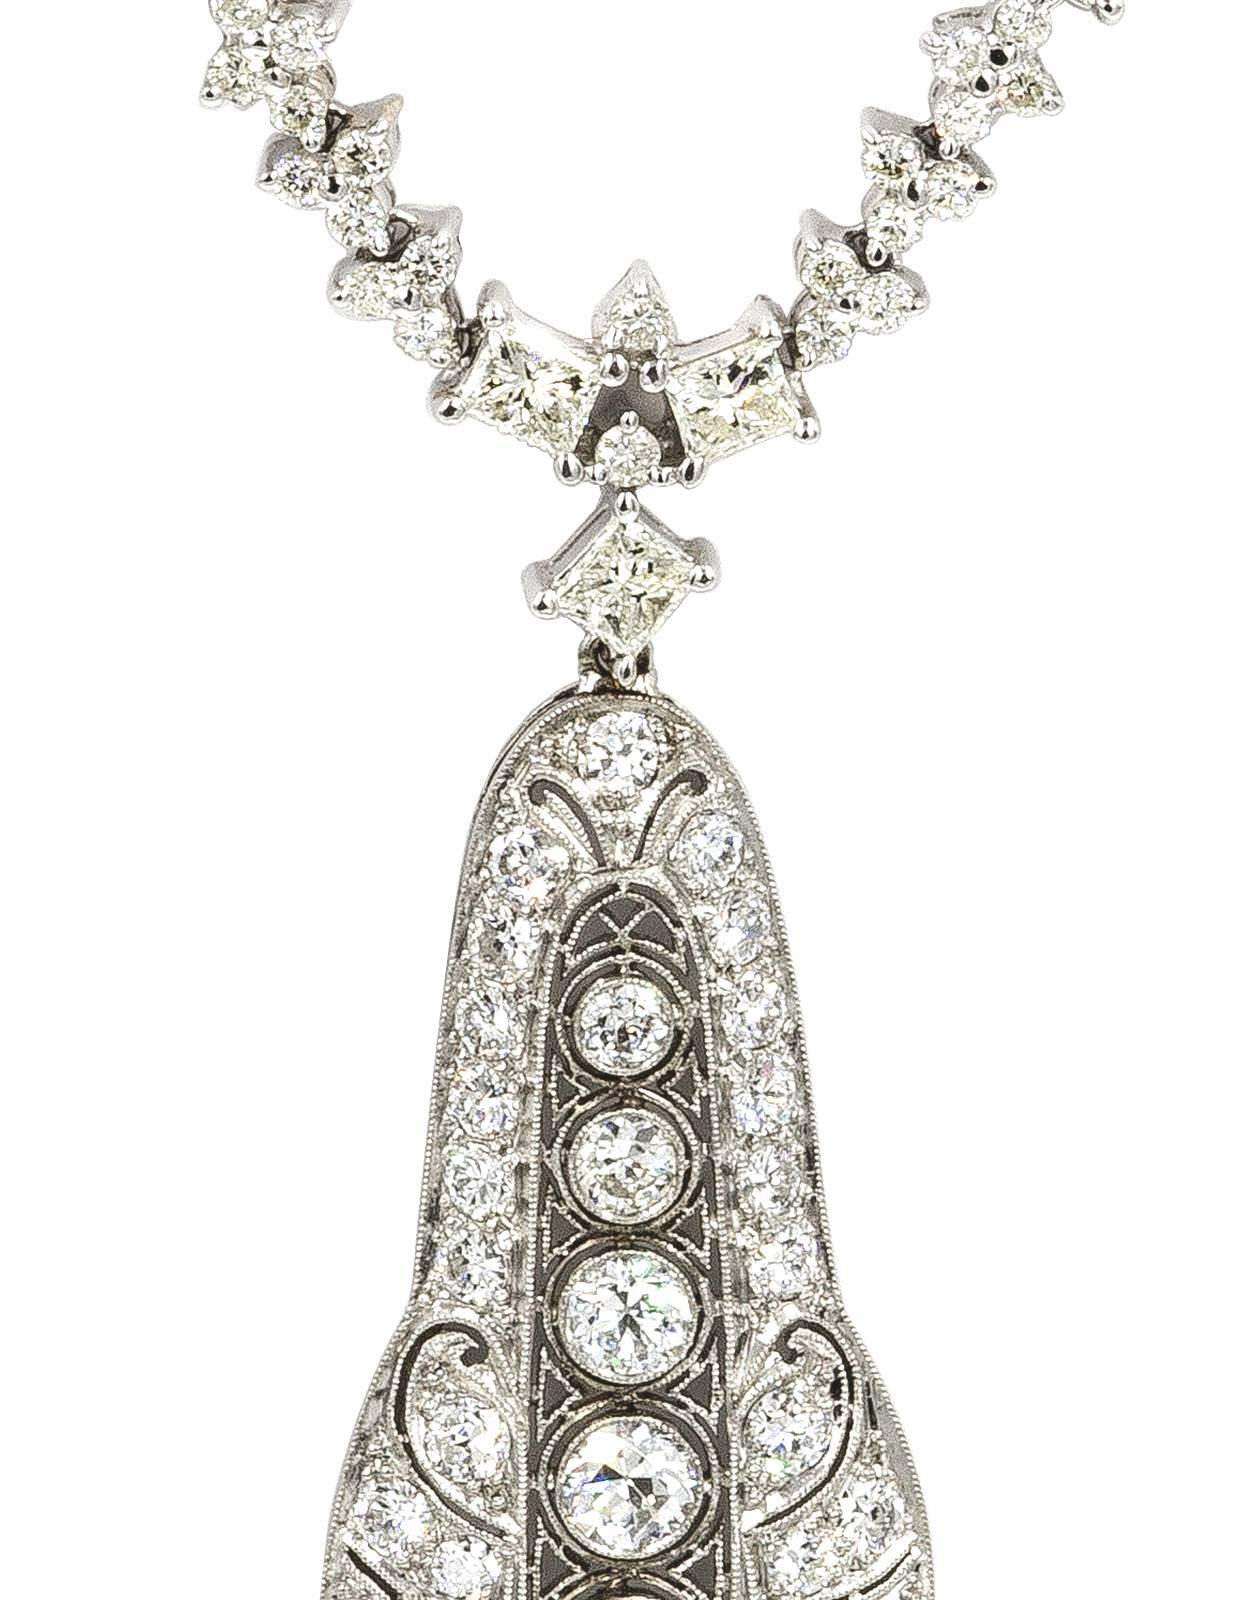 Edwardian Diamond Platinum Pendant In Excellent Condition For Sale In Summerland, CA